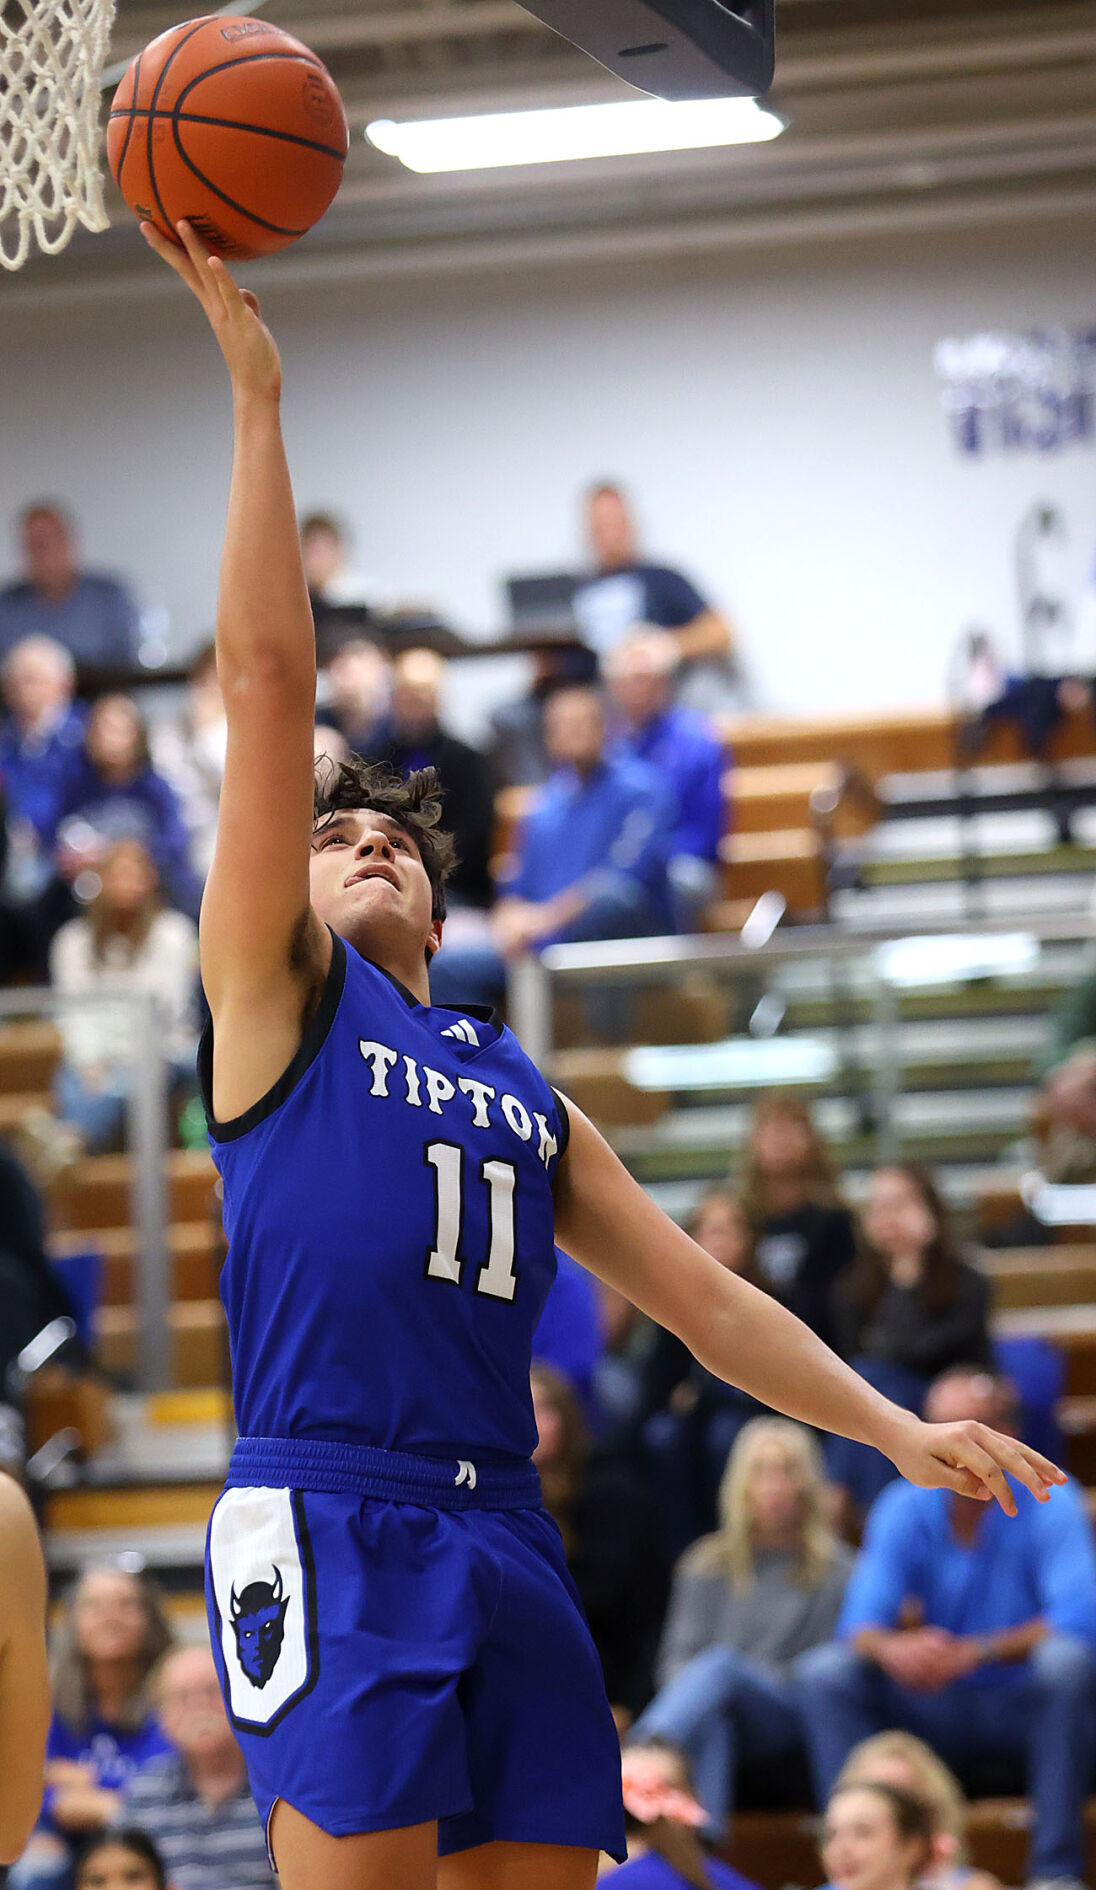 Tipton’s Third-Quarter Surge Secures 66-34 Win over Elwood in Boys Basketball Opener